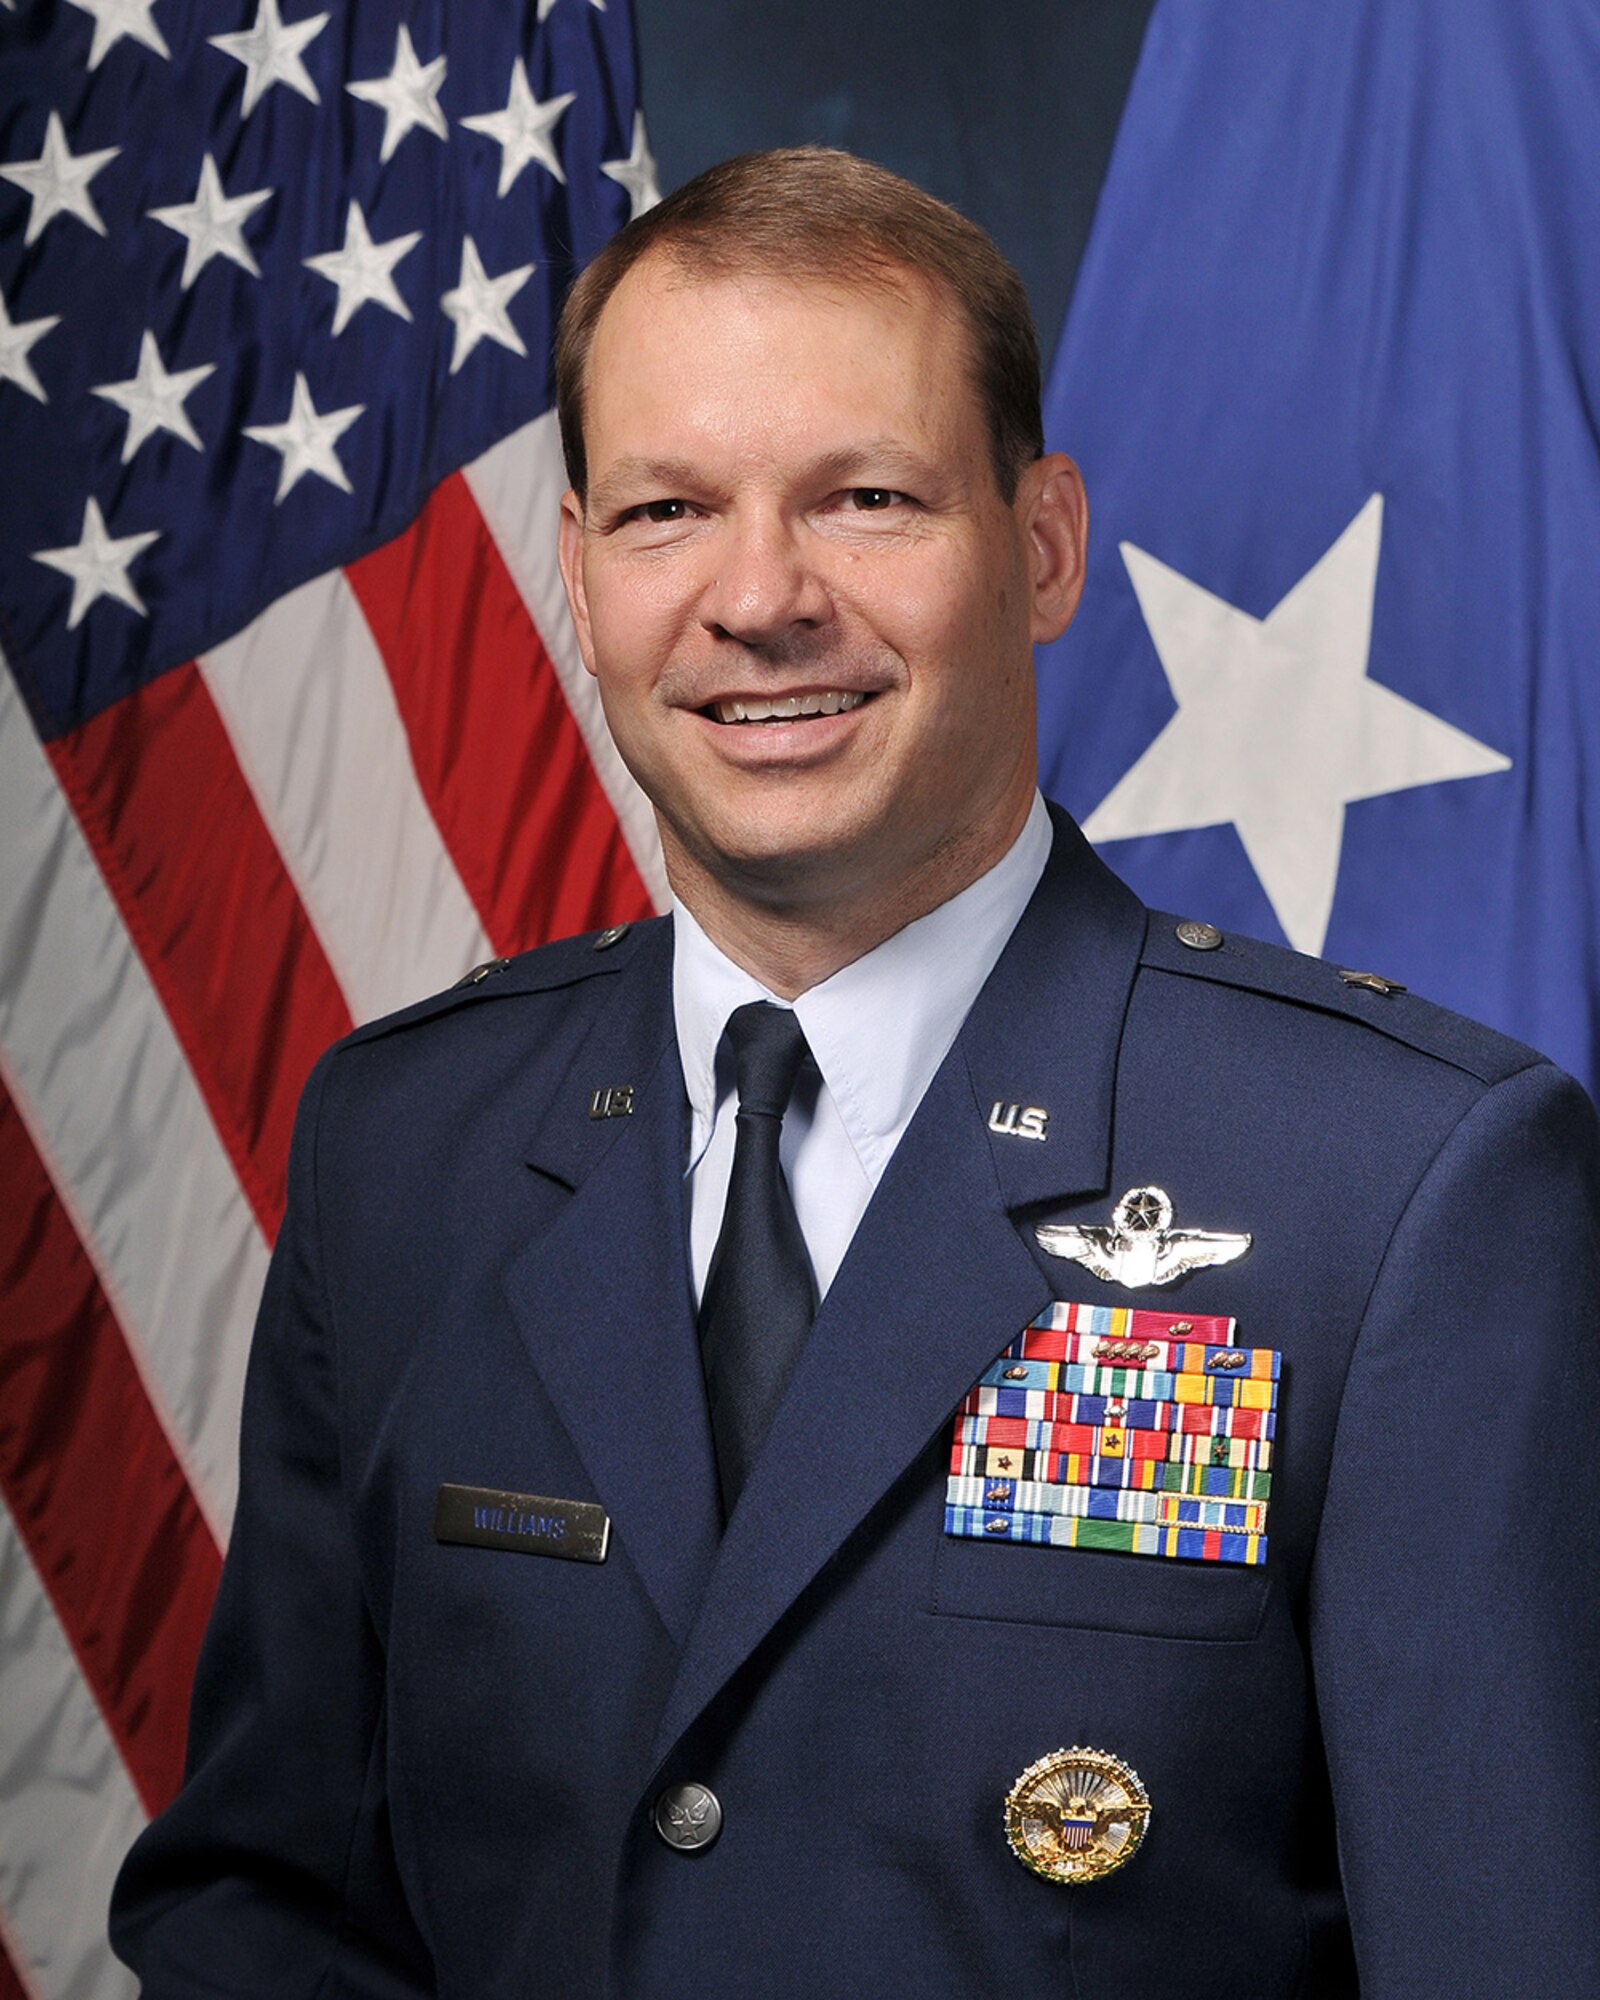 Brig. Gen. Stephen Williams, the U.S. Air Force Academy's commandant of cadets. (U.S. Air Force photo)